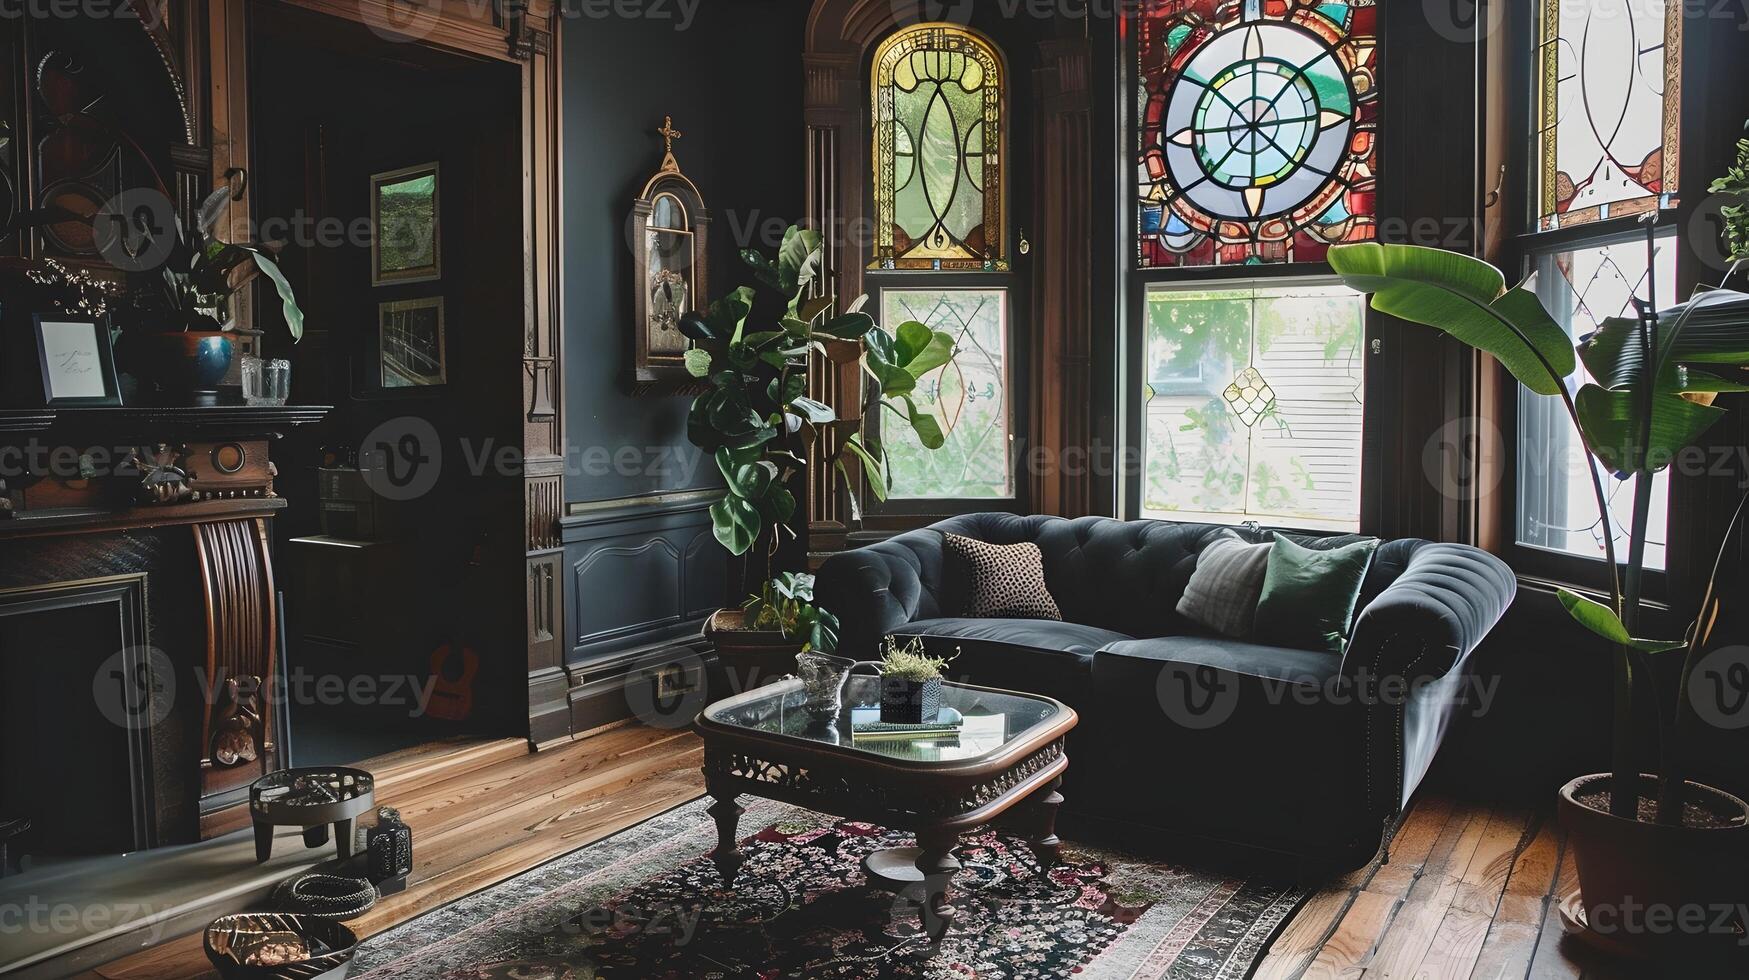 Captivating Vintage-Inspired Interiors Exuding Timeless Elegance and Refined Comfort photo